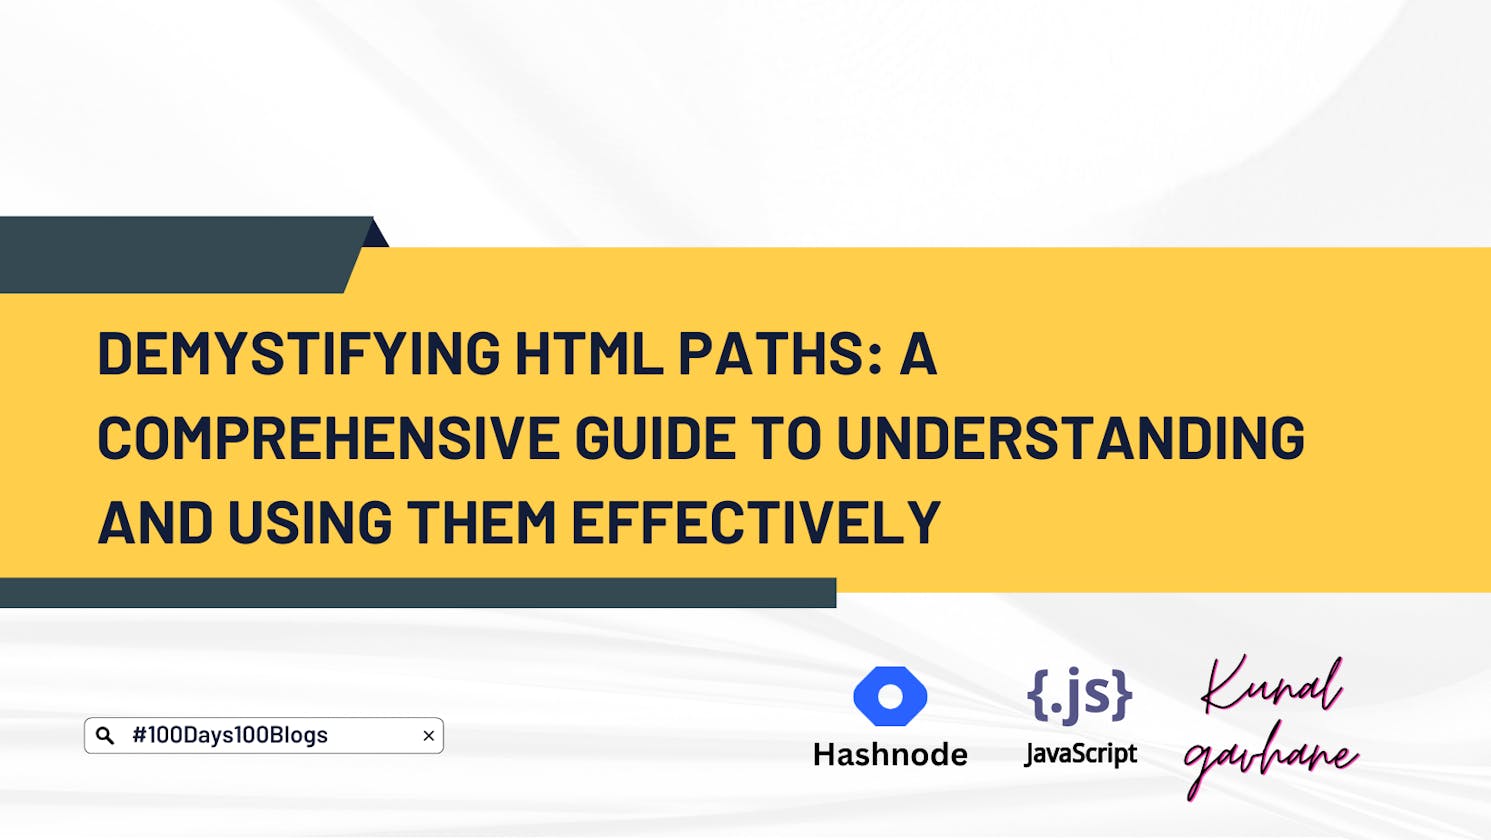 Demystifying HTML Paths: A Comprehensive Guide to Understanding and Using Them Effectively